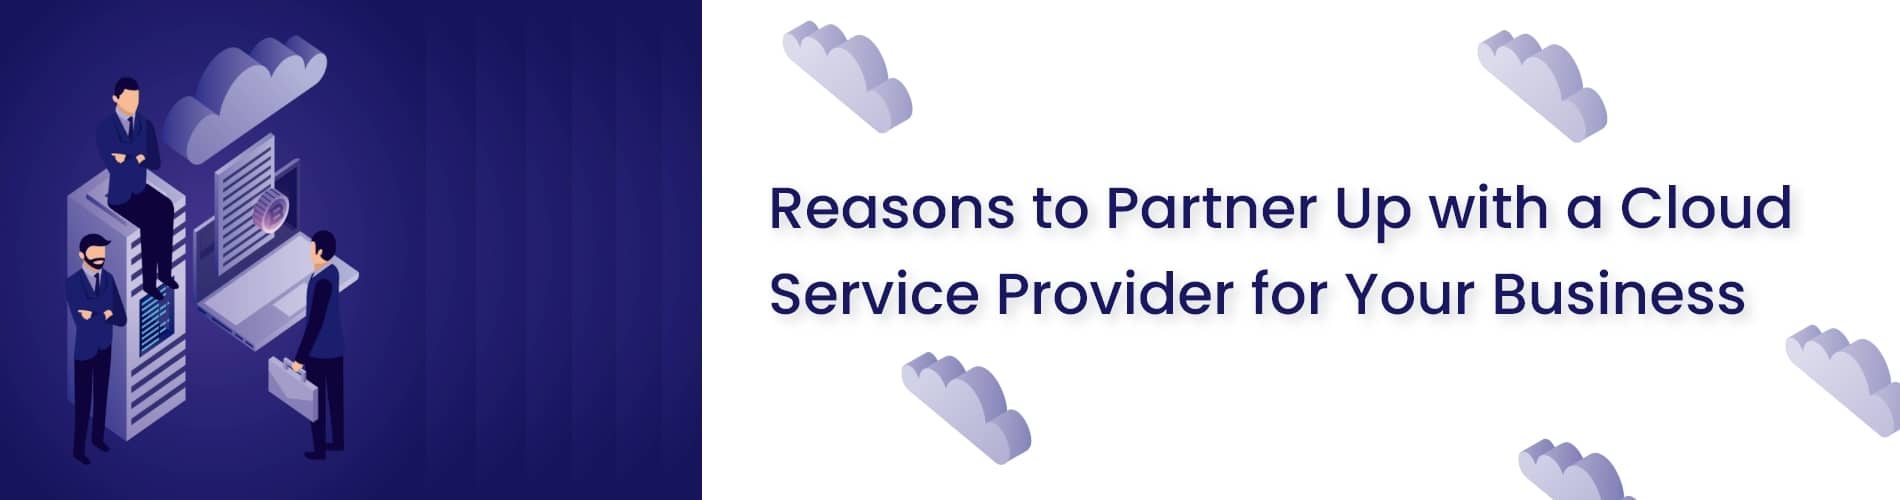 Reasons to partner with a cloud service provider for your business